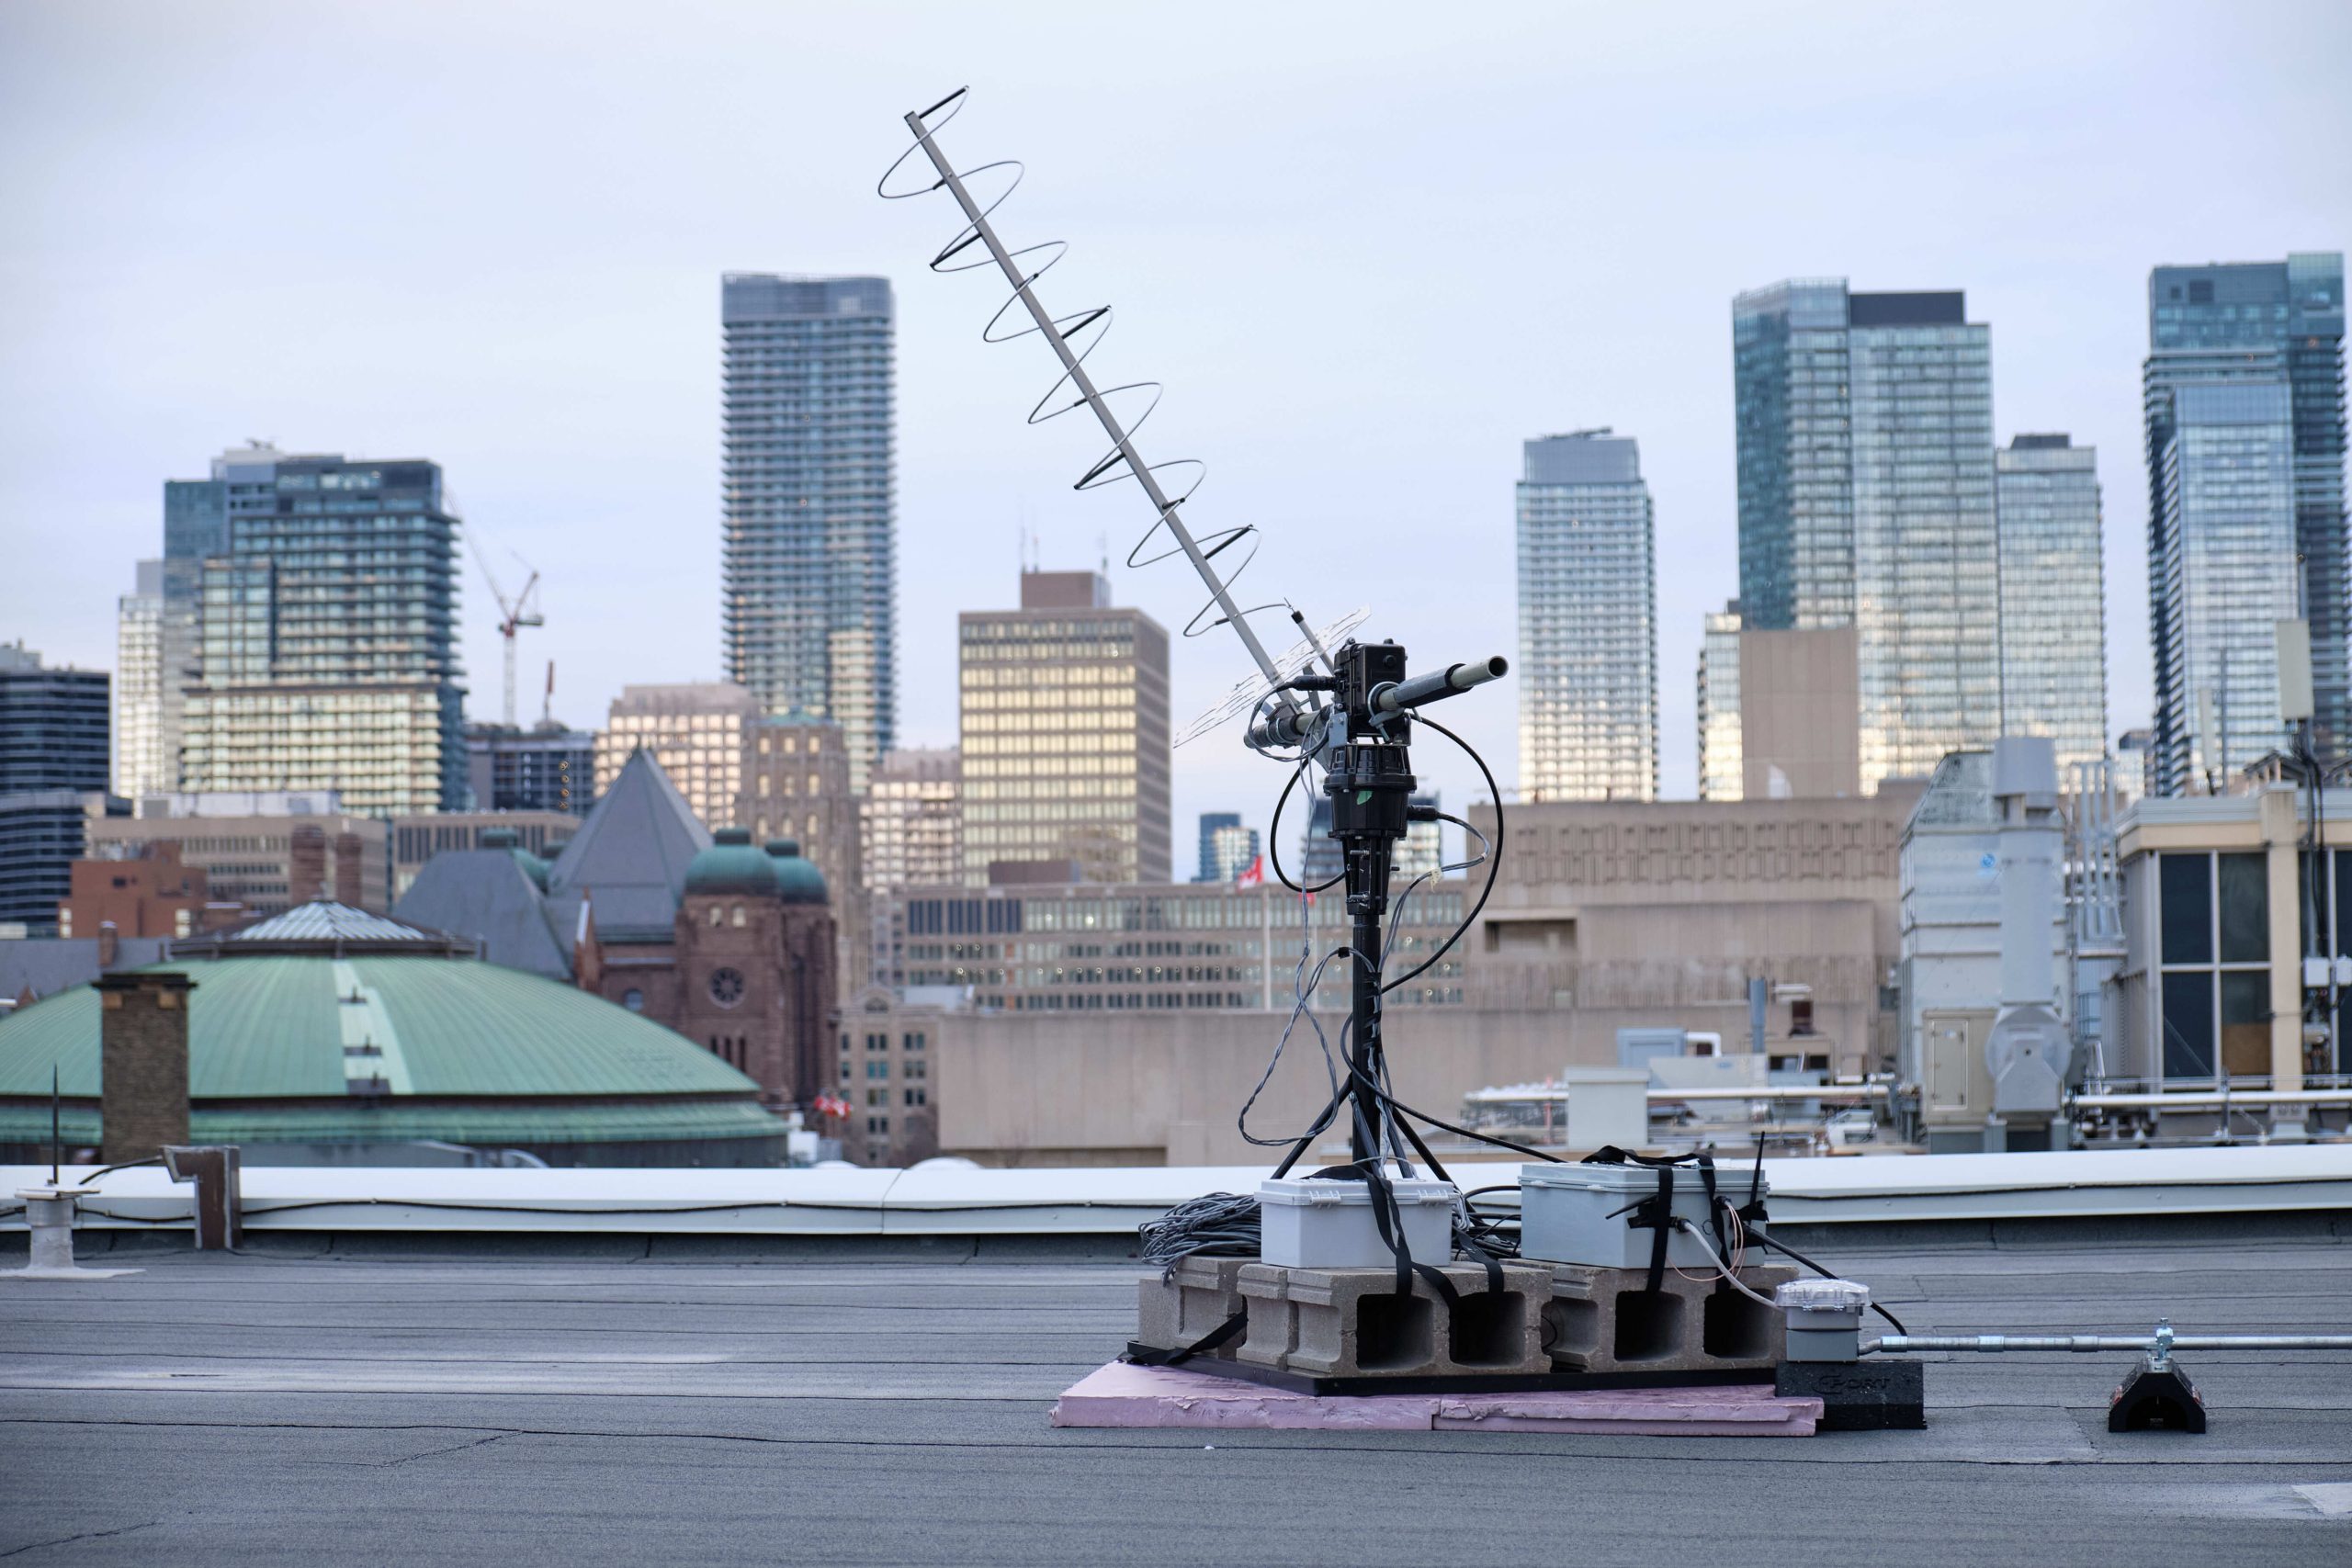 The HERON satellite is seen on the rooftop of Bahen Centre, which is the location of its Ground Station.